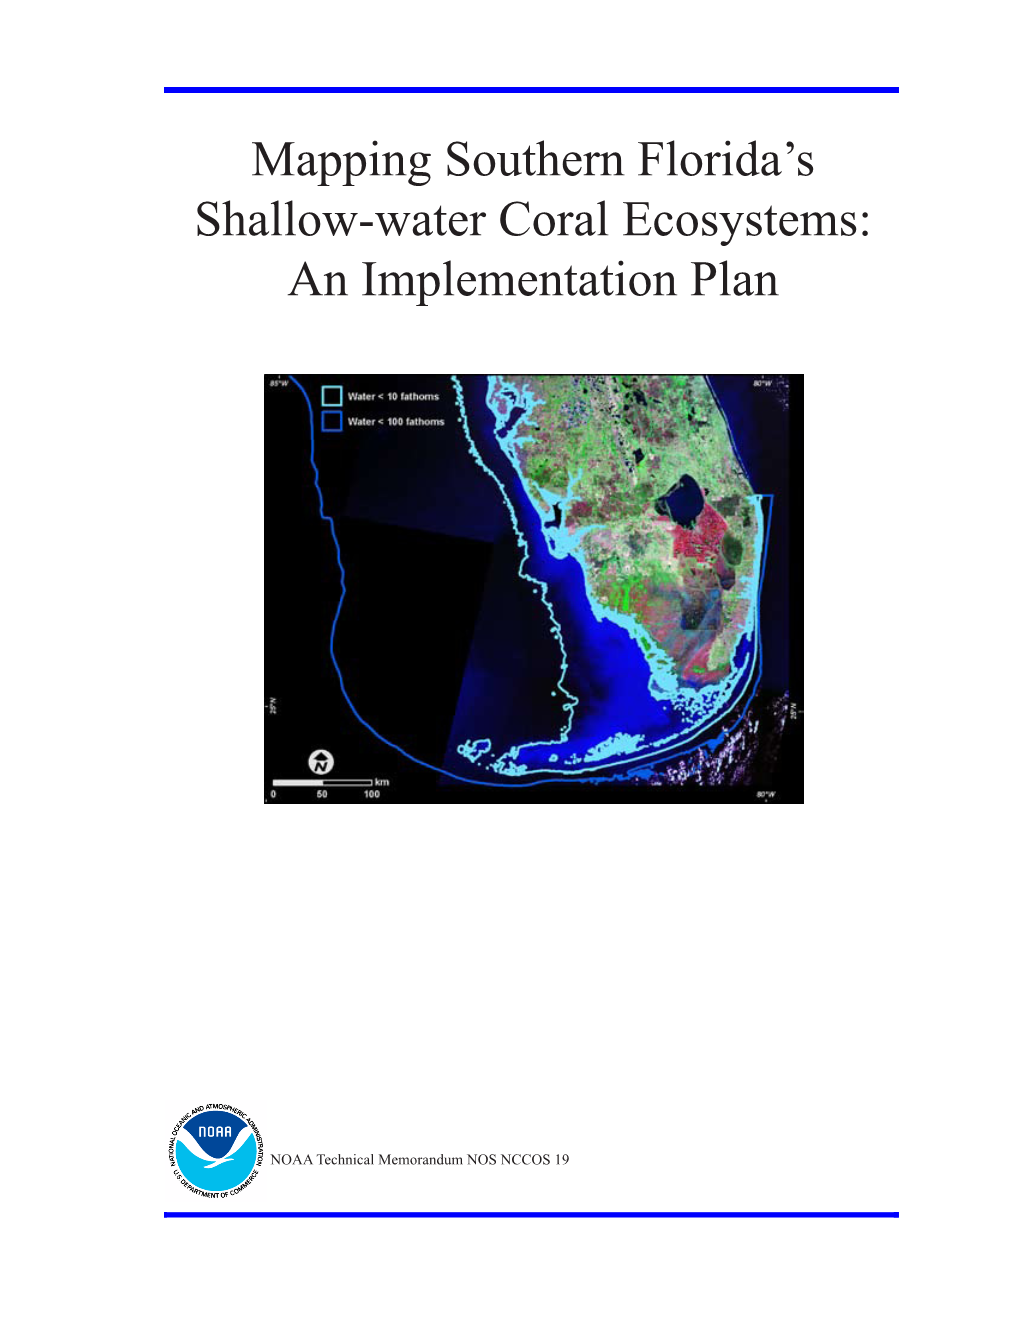 Mapping Southern Florida's Shallow